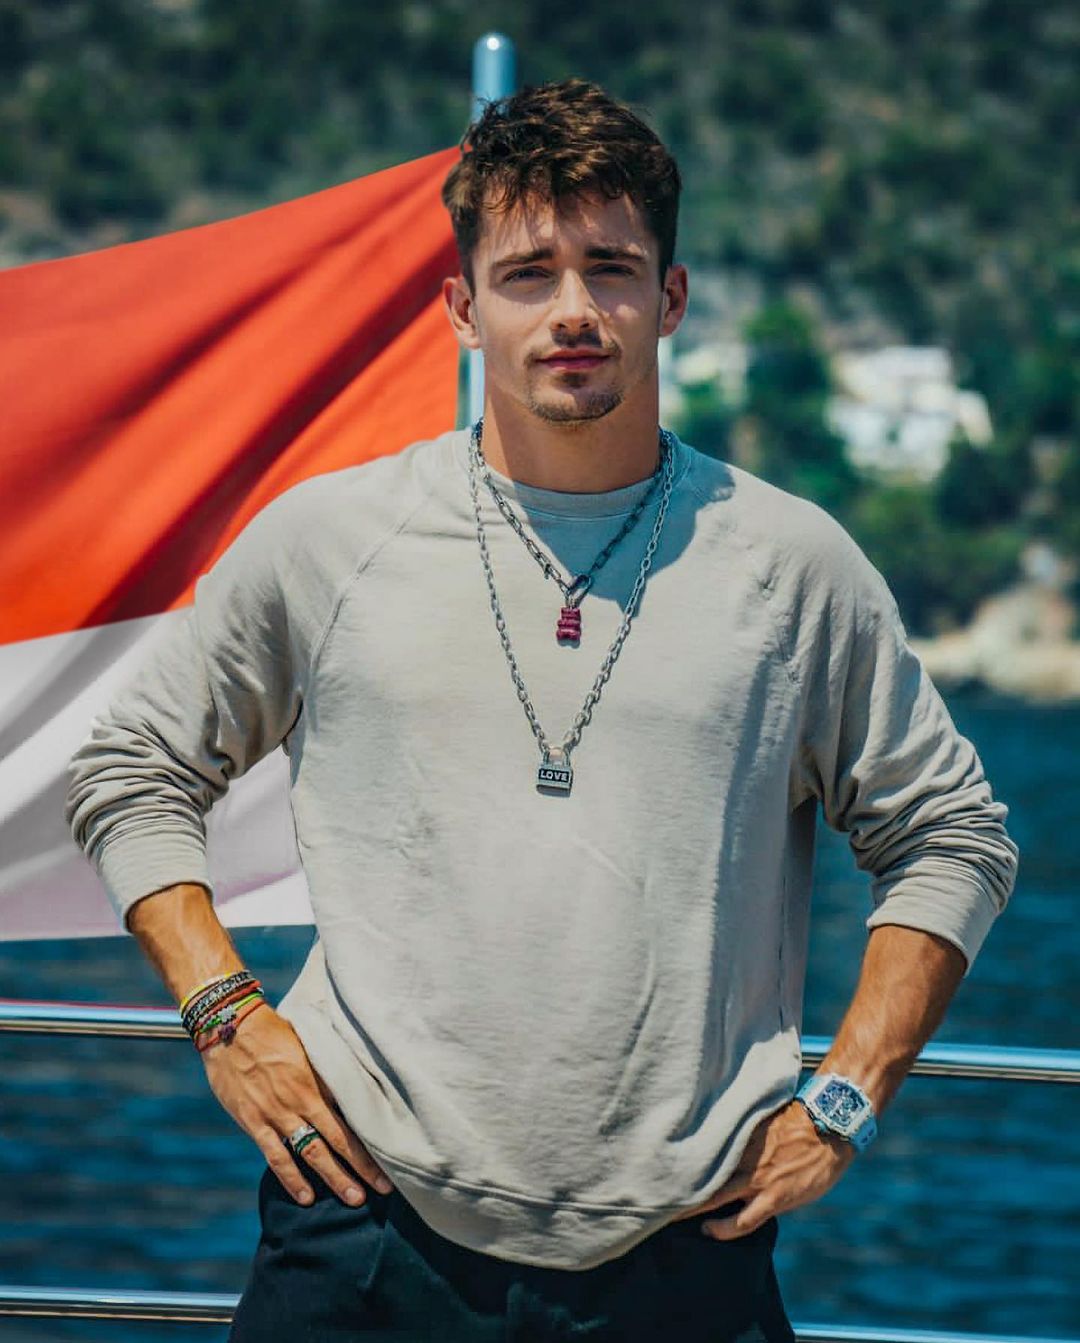 Charles Leclerc's Choice of the Richard Mille Watches is a Stroke of Genius